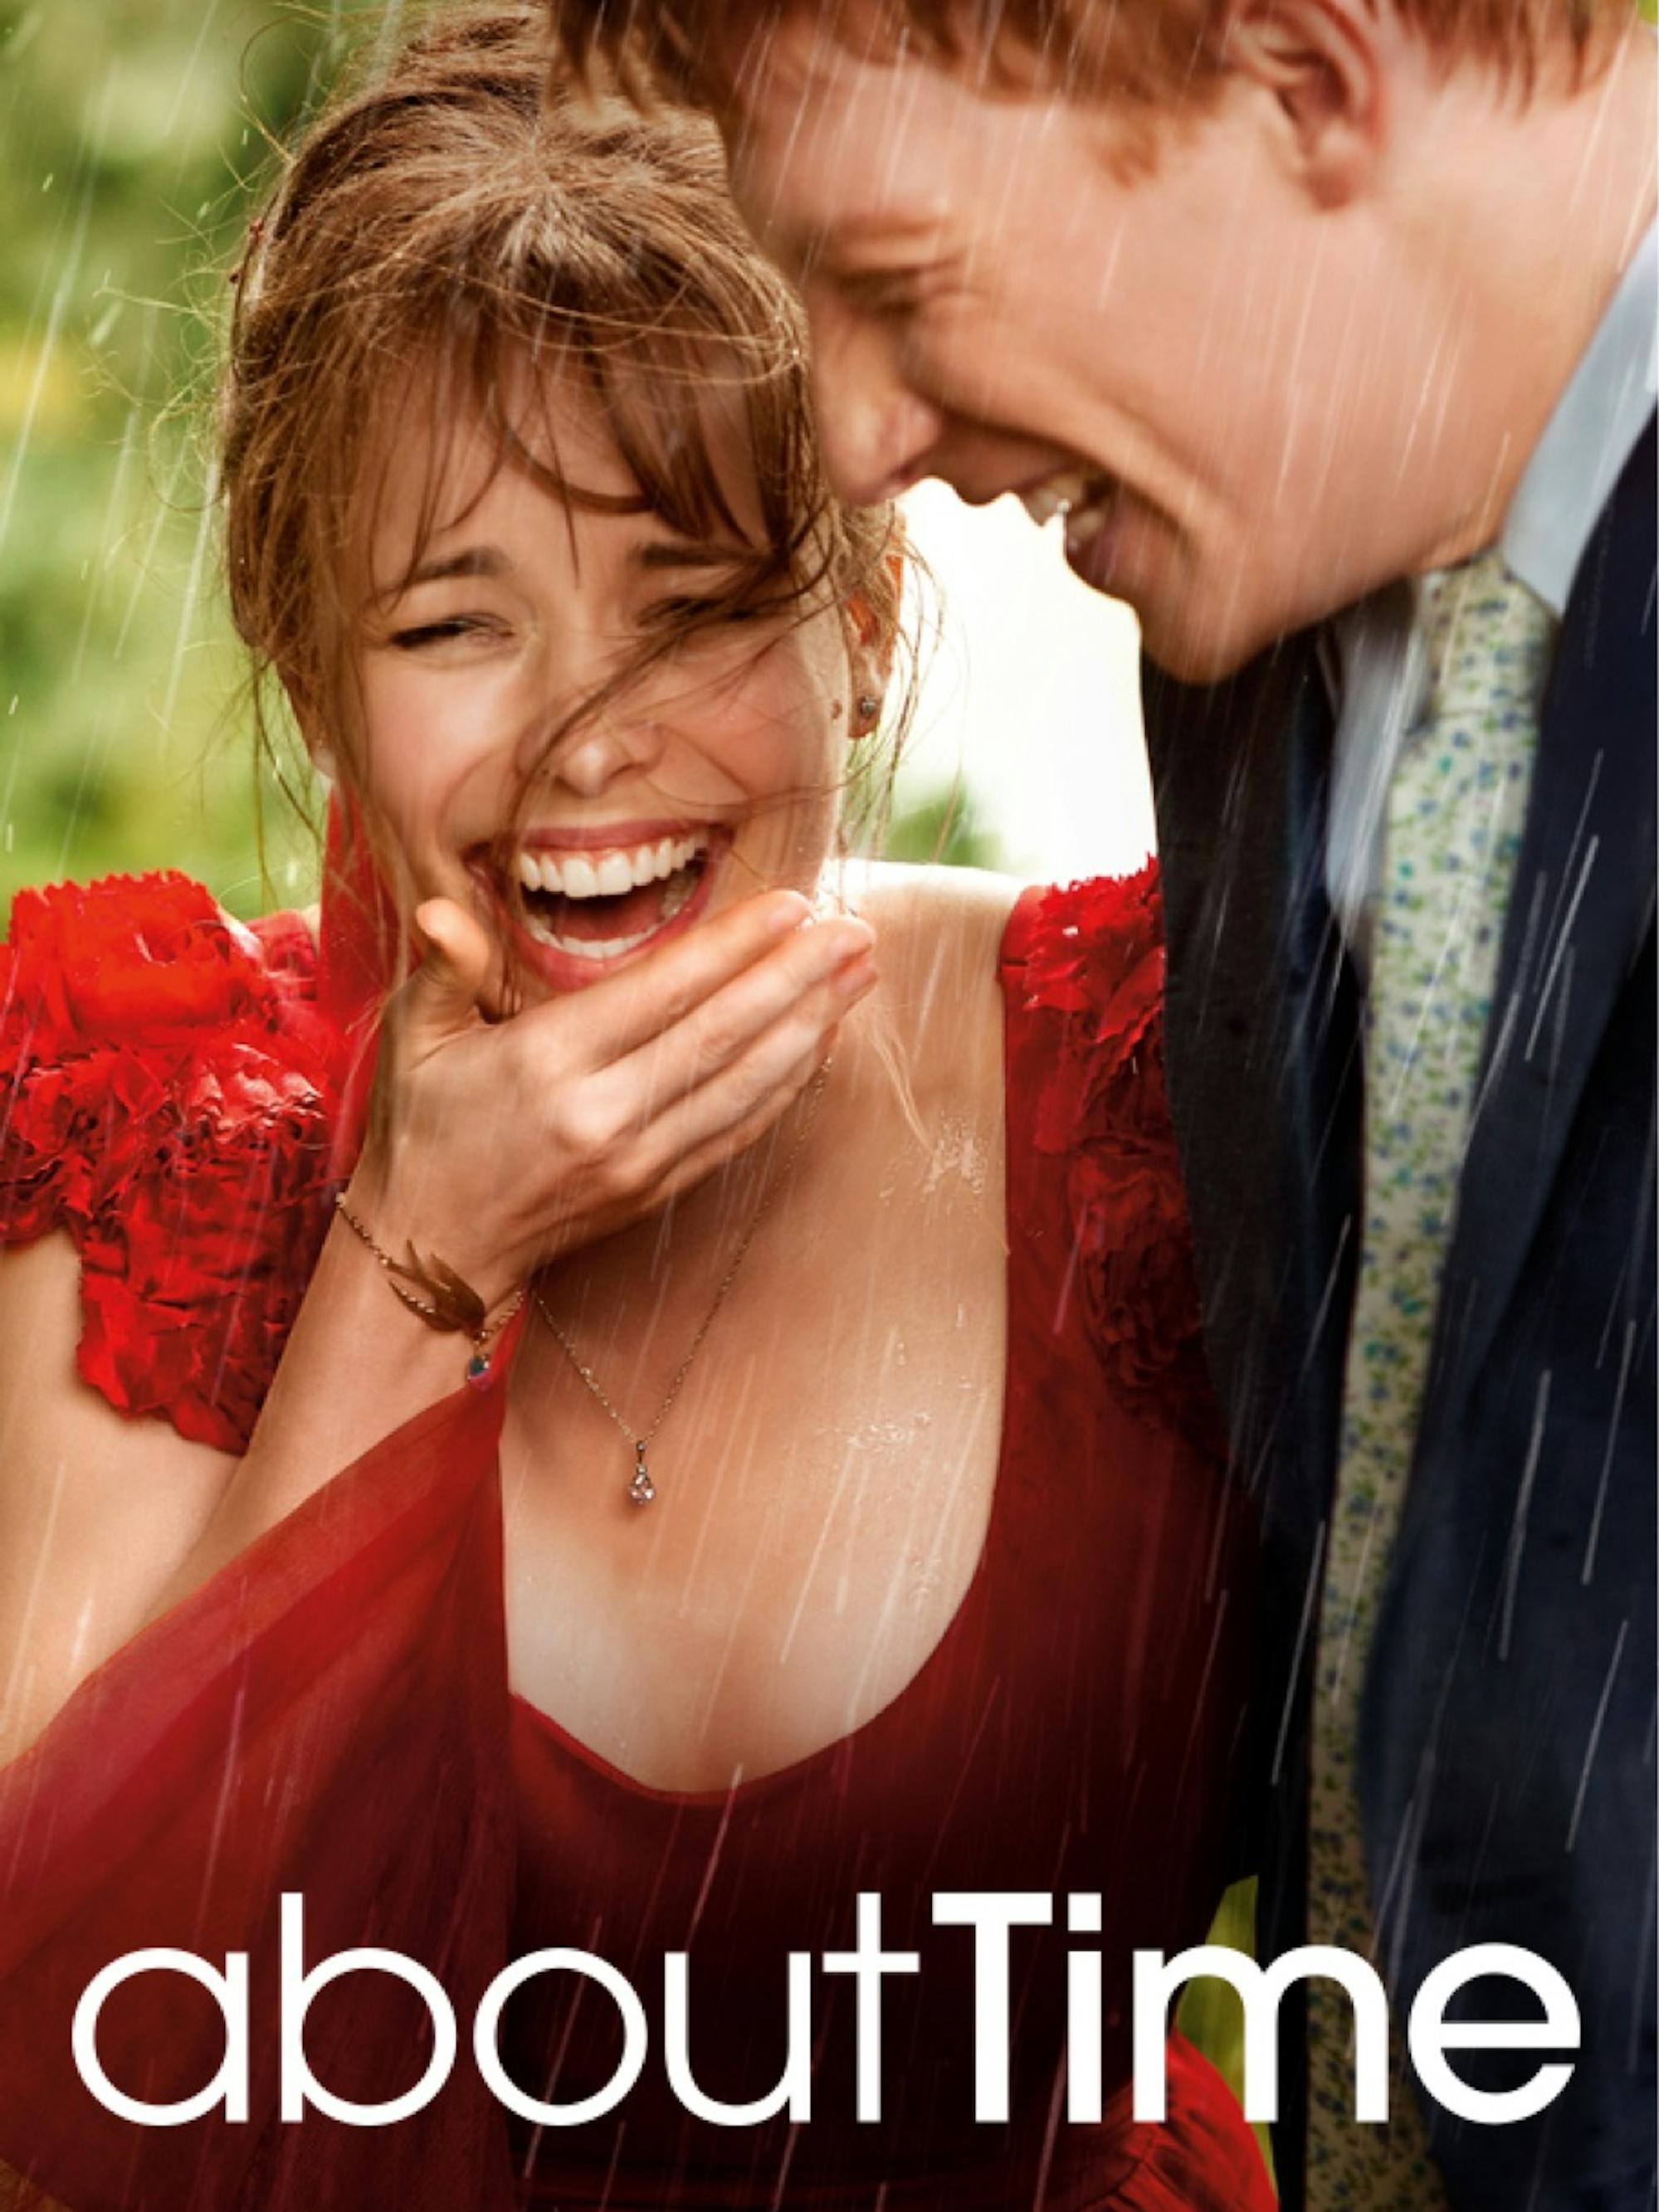 The movie poster for About Time. Rachel McAdams and Domhnall Gleeson fill the shot, smiling in the rain. McAdams wears a red gown, and Gleeson wears a suit. 